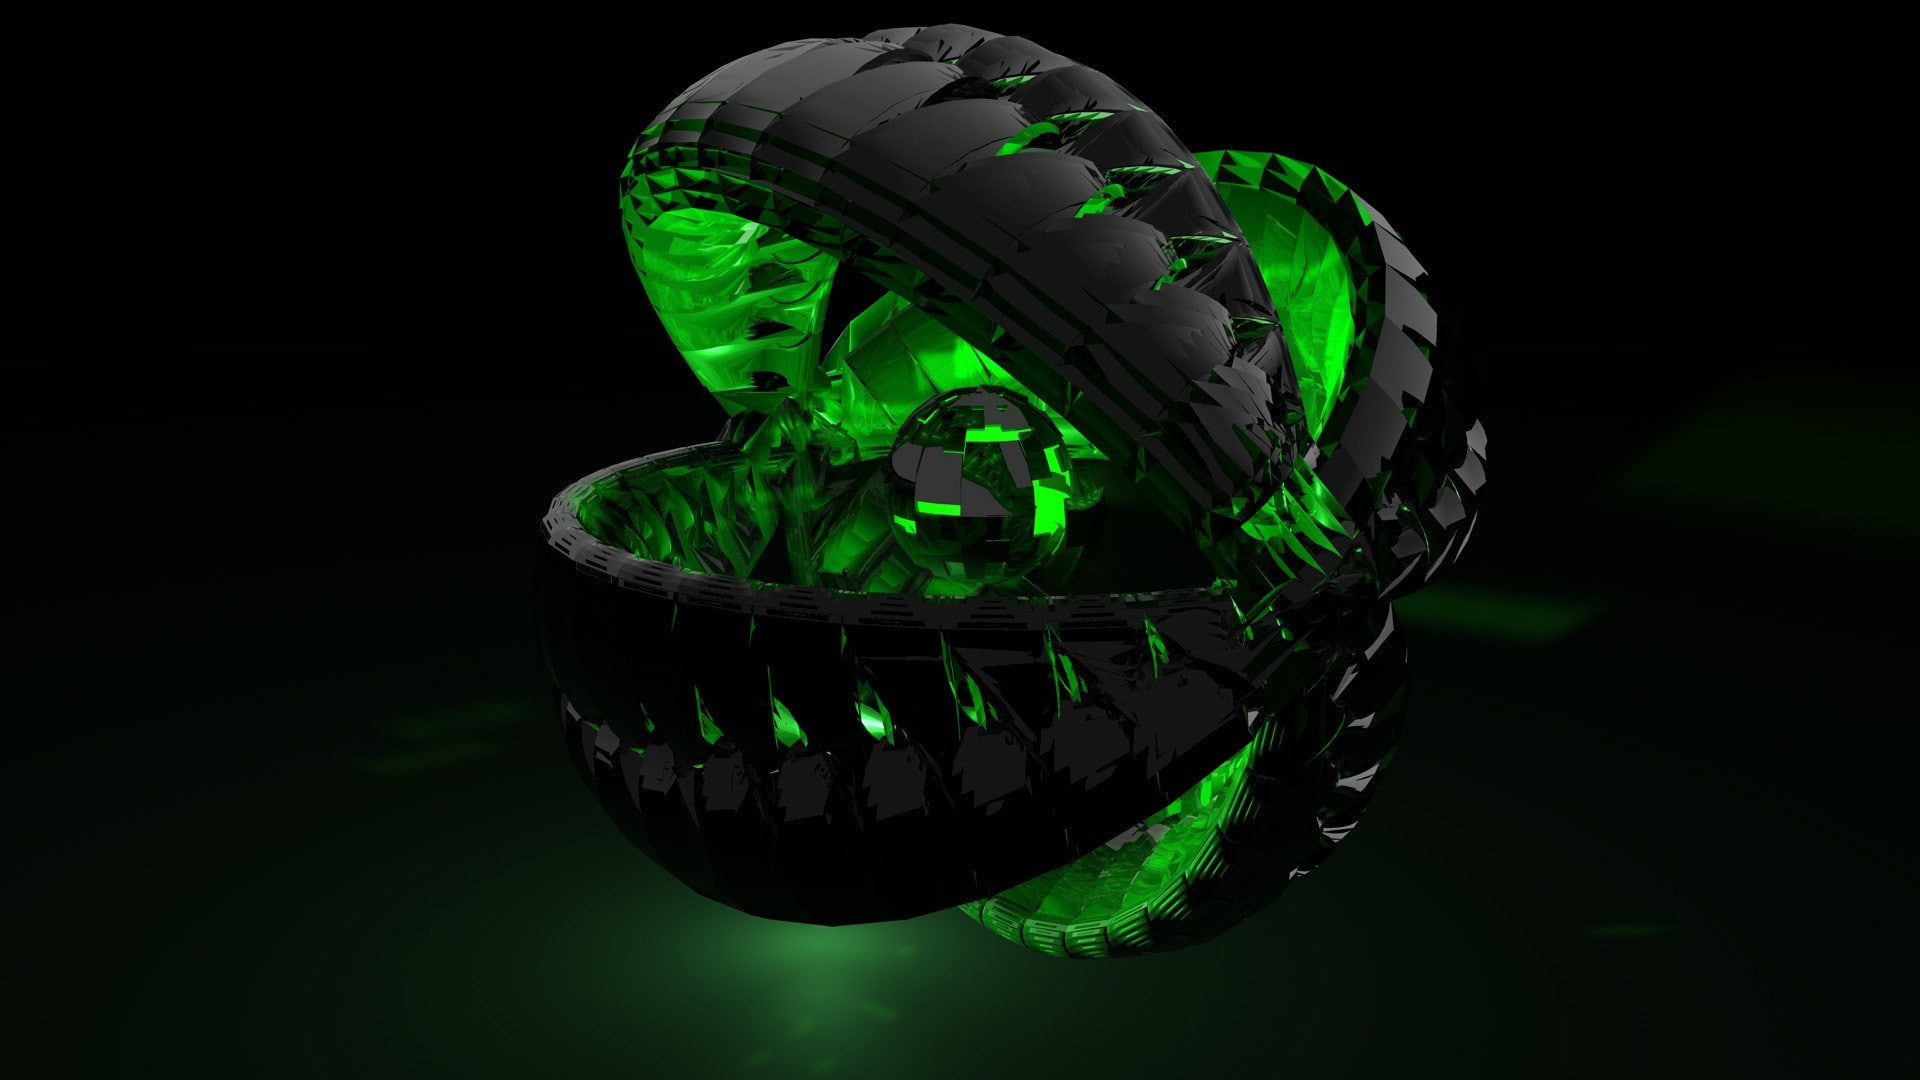 3D abstract ball, black and green electronic device illustration